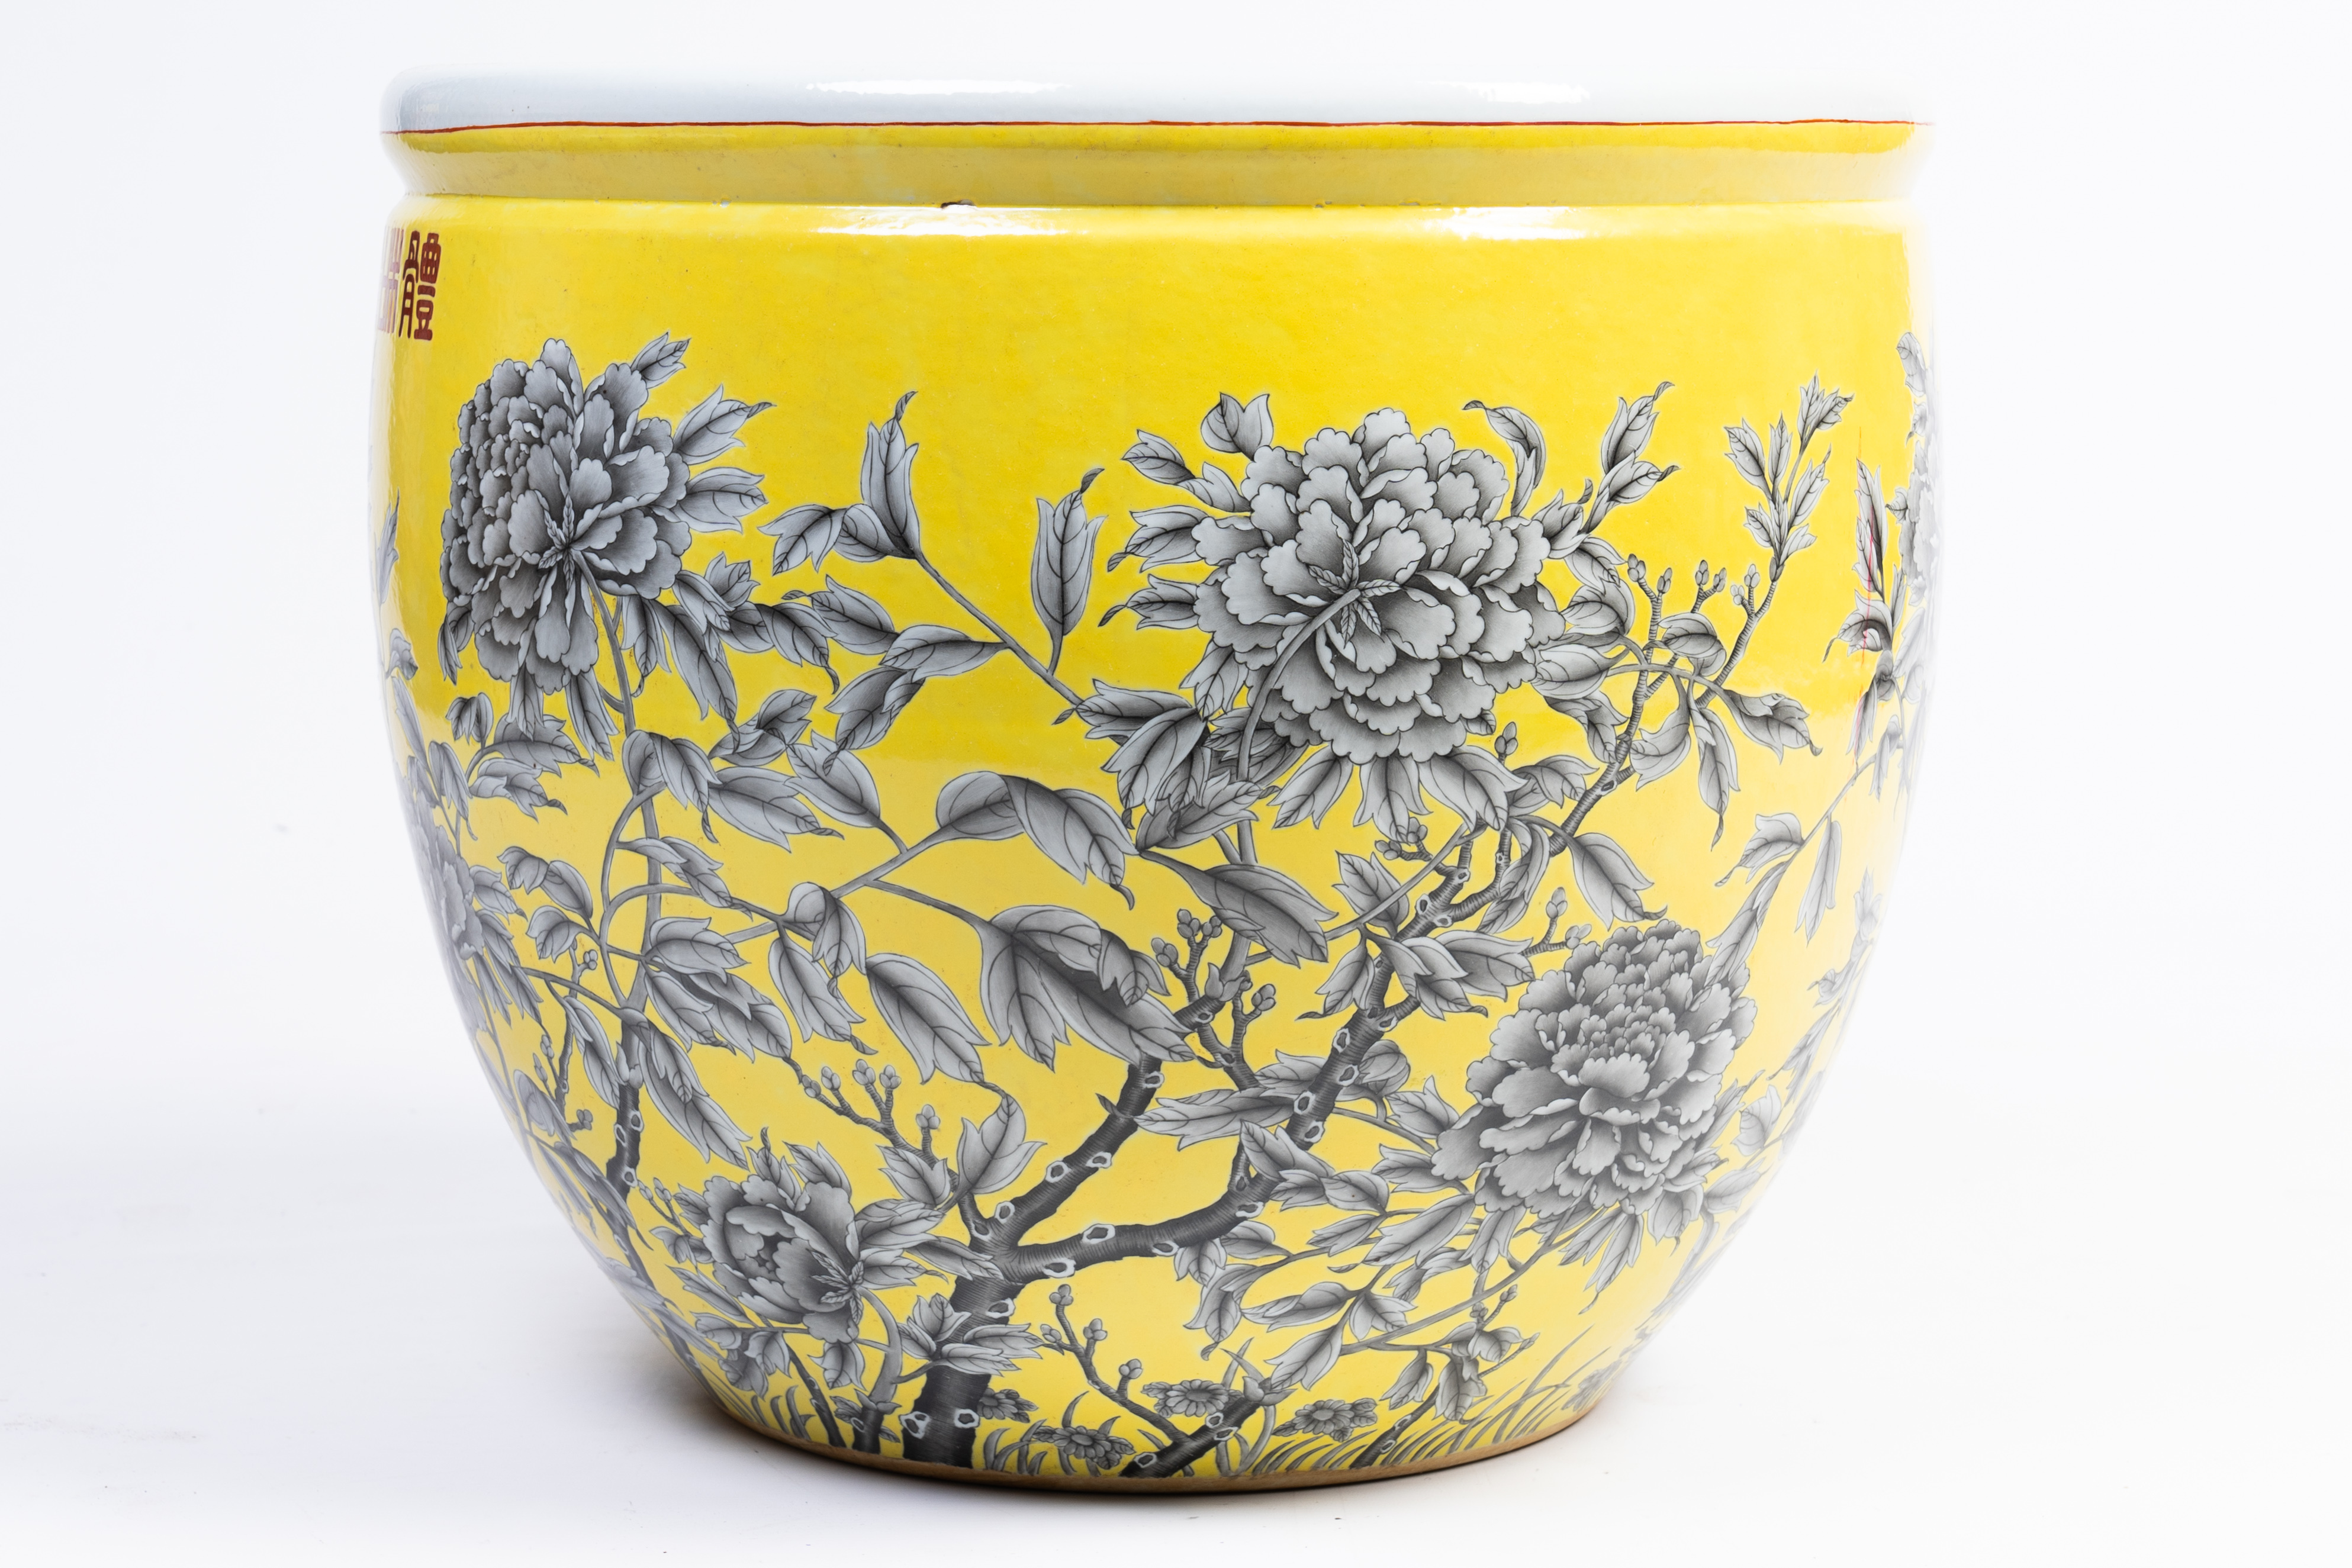 A large Chinese Dayazhai style jardiniere with floral design on a yellow ground, 19th/20th C. - Image 9 of 14